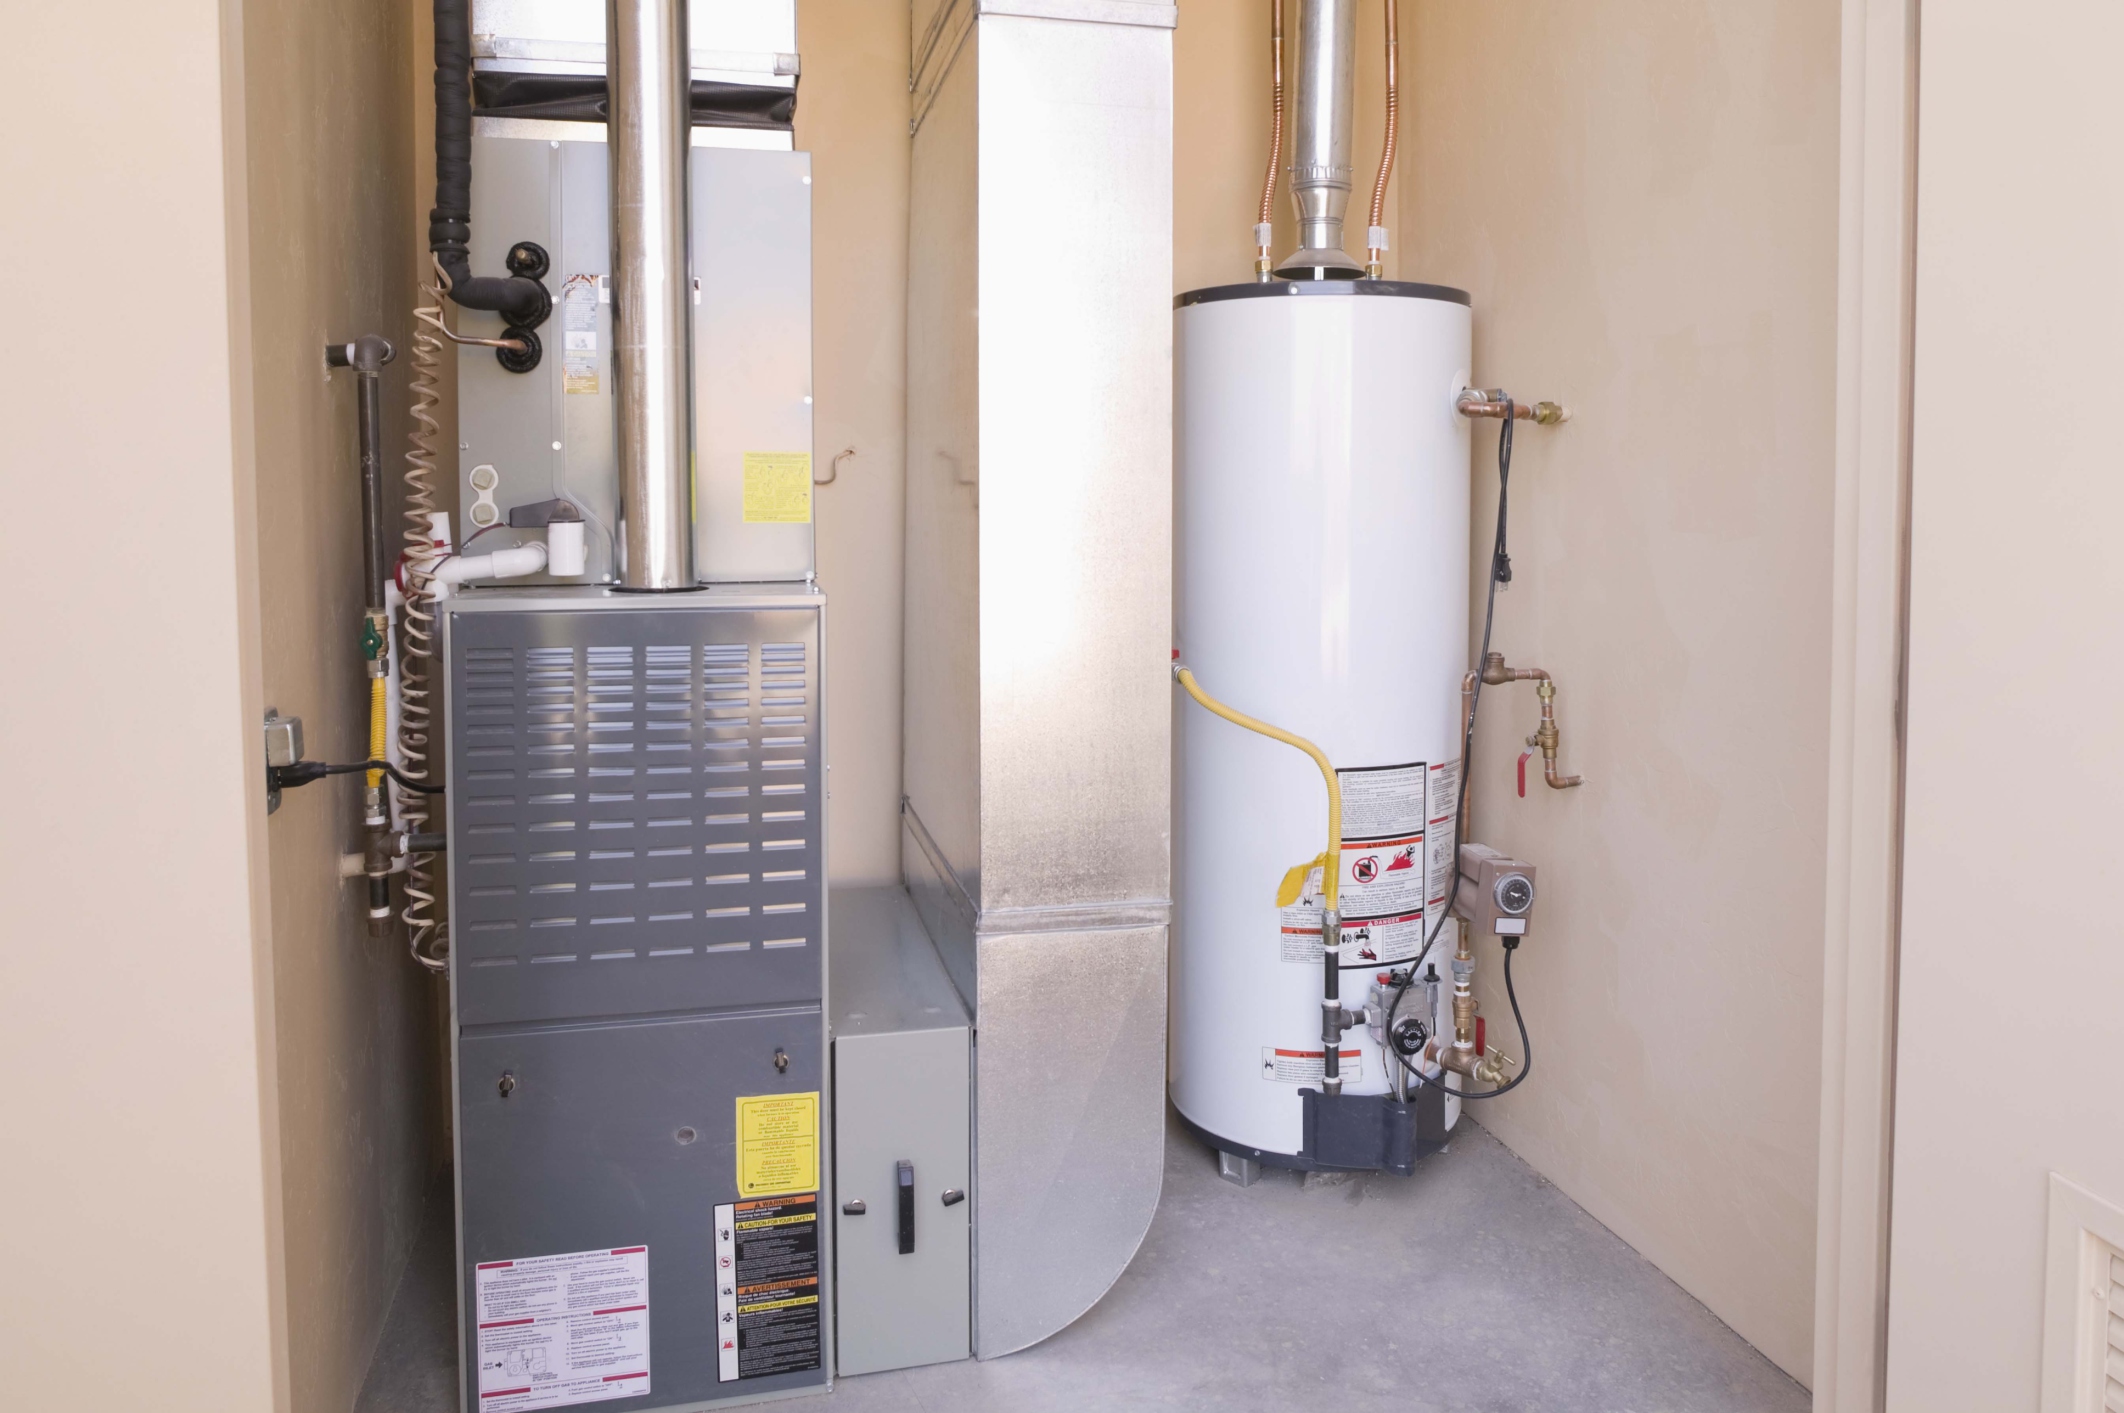 Residential & Commercial Oil/Gas Heating System Installation and Repair Contractors in Massachusetts